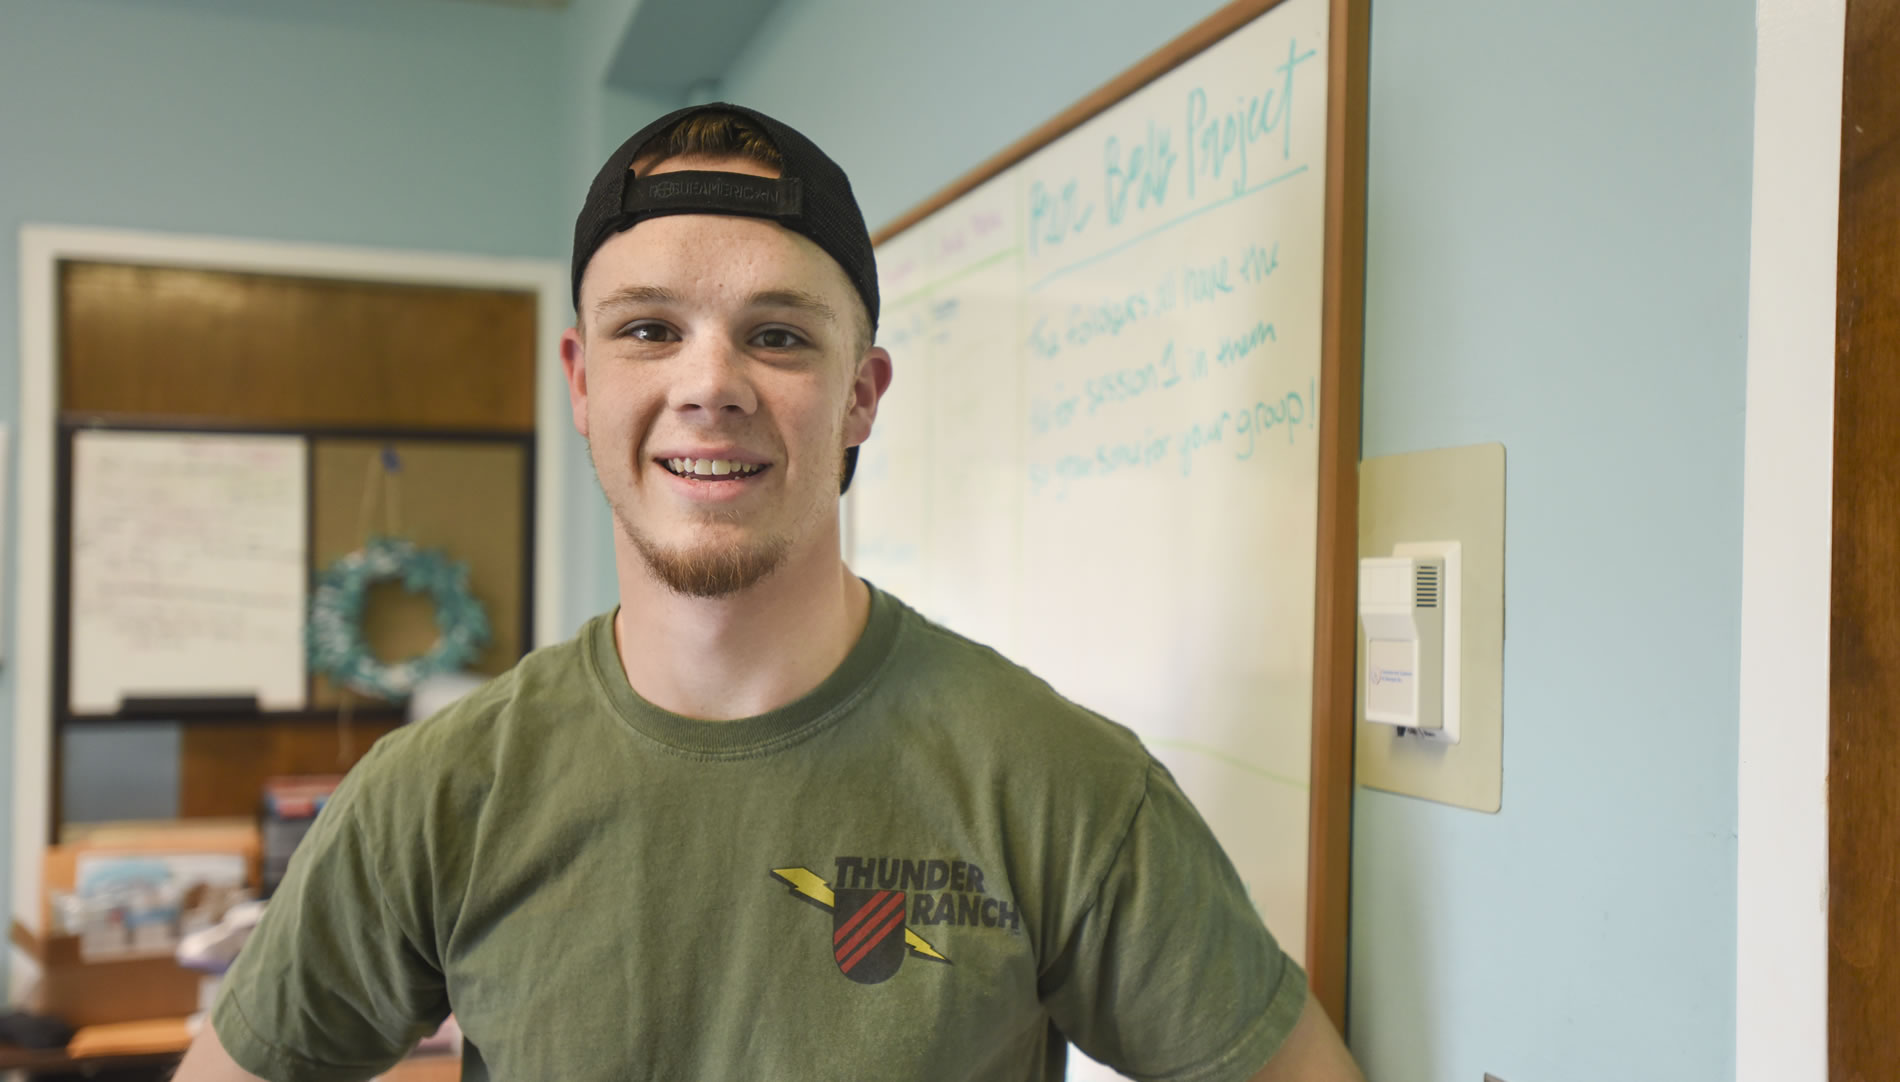             Exercise science grad heads to medical school     